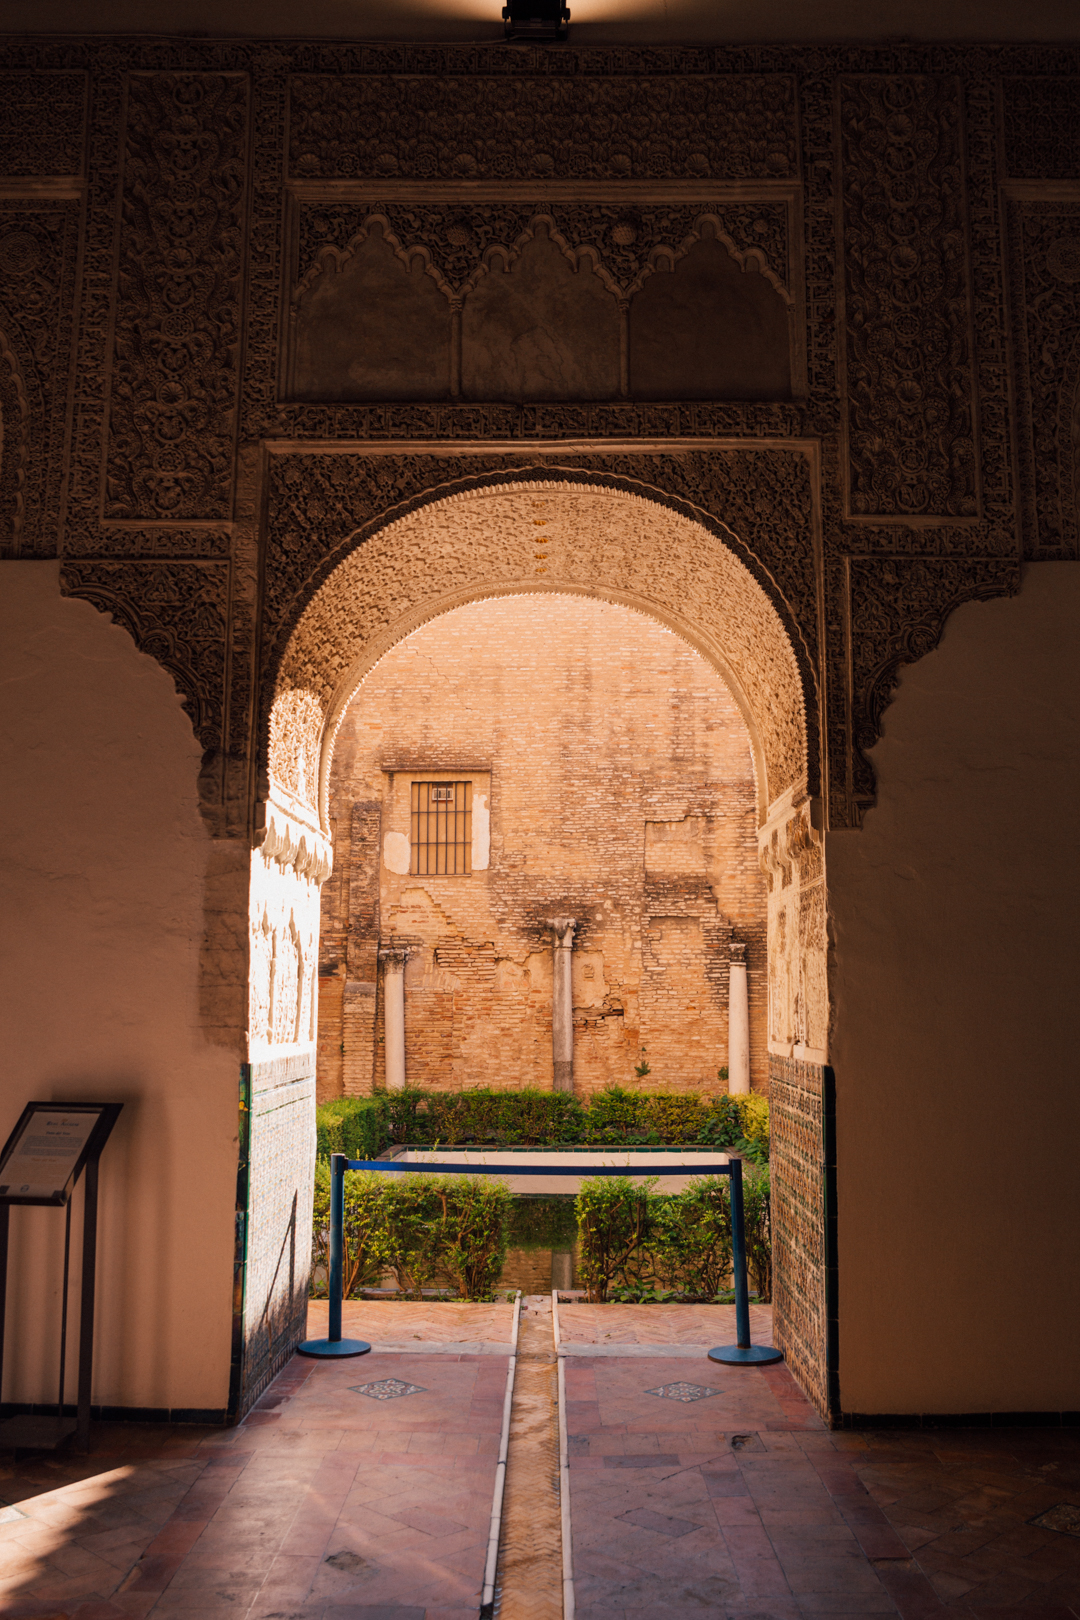 The Real Alcazar of Seville